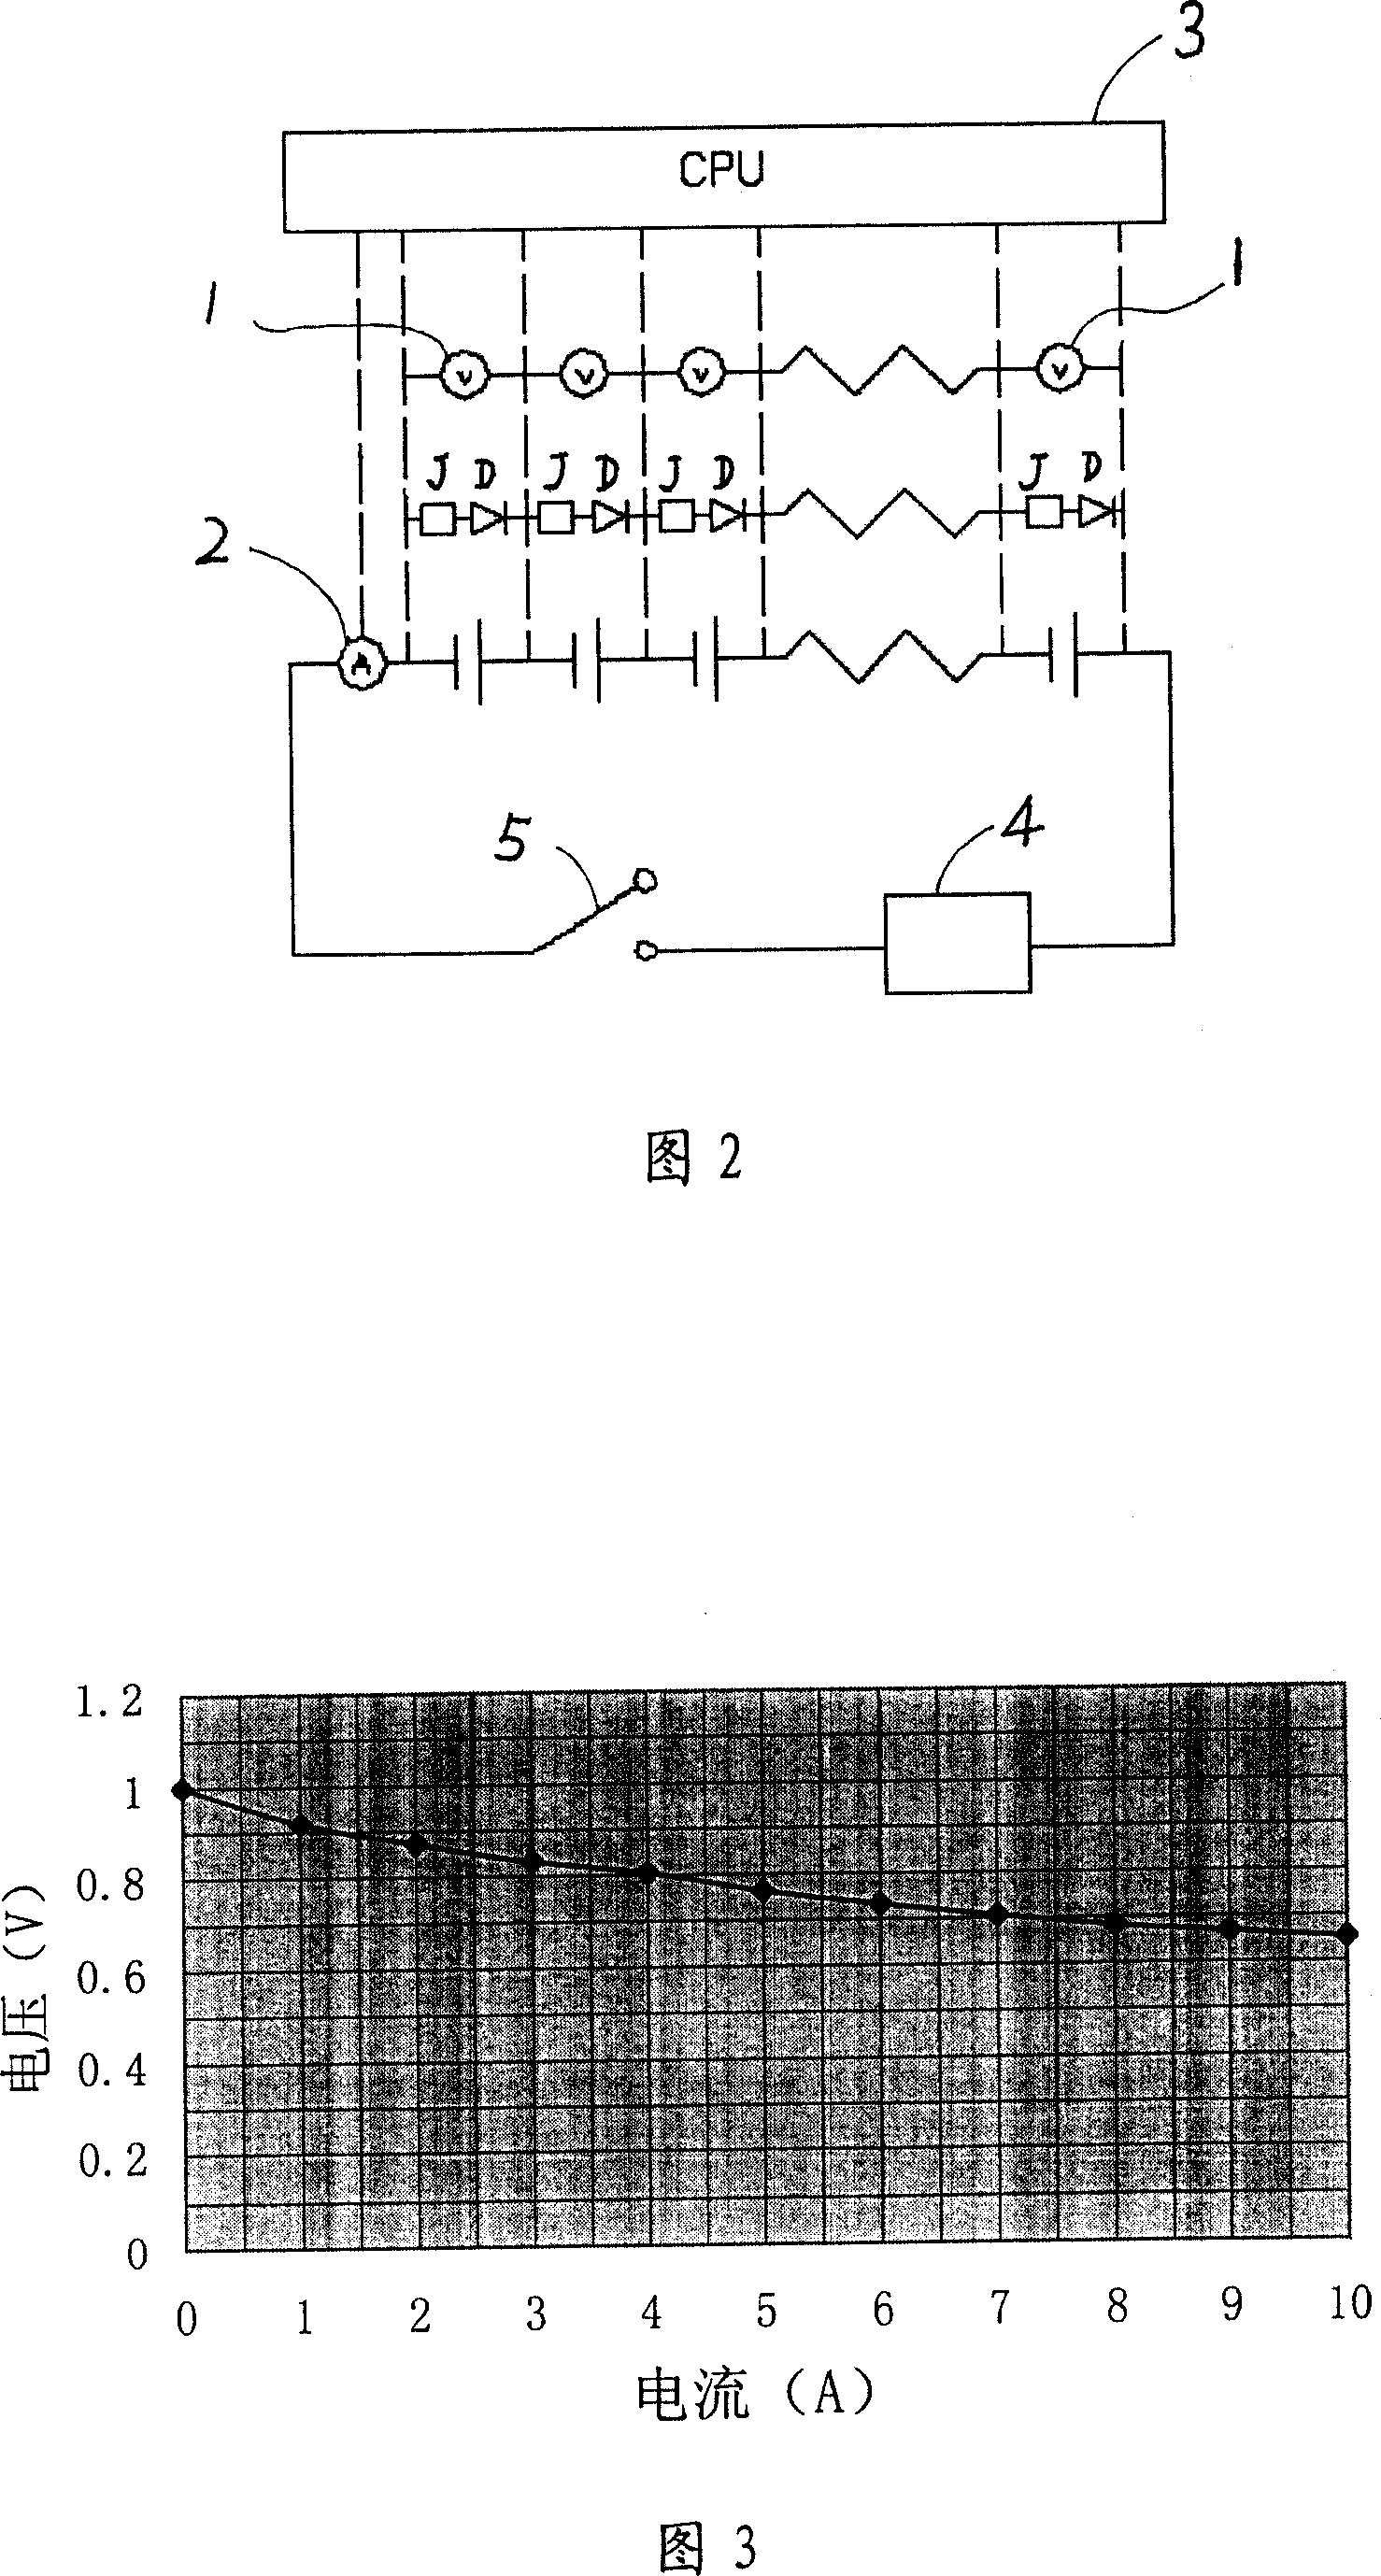 Control method for fuel cell safety operation